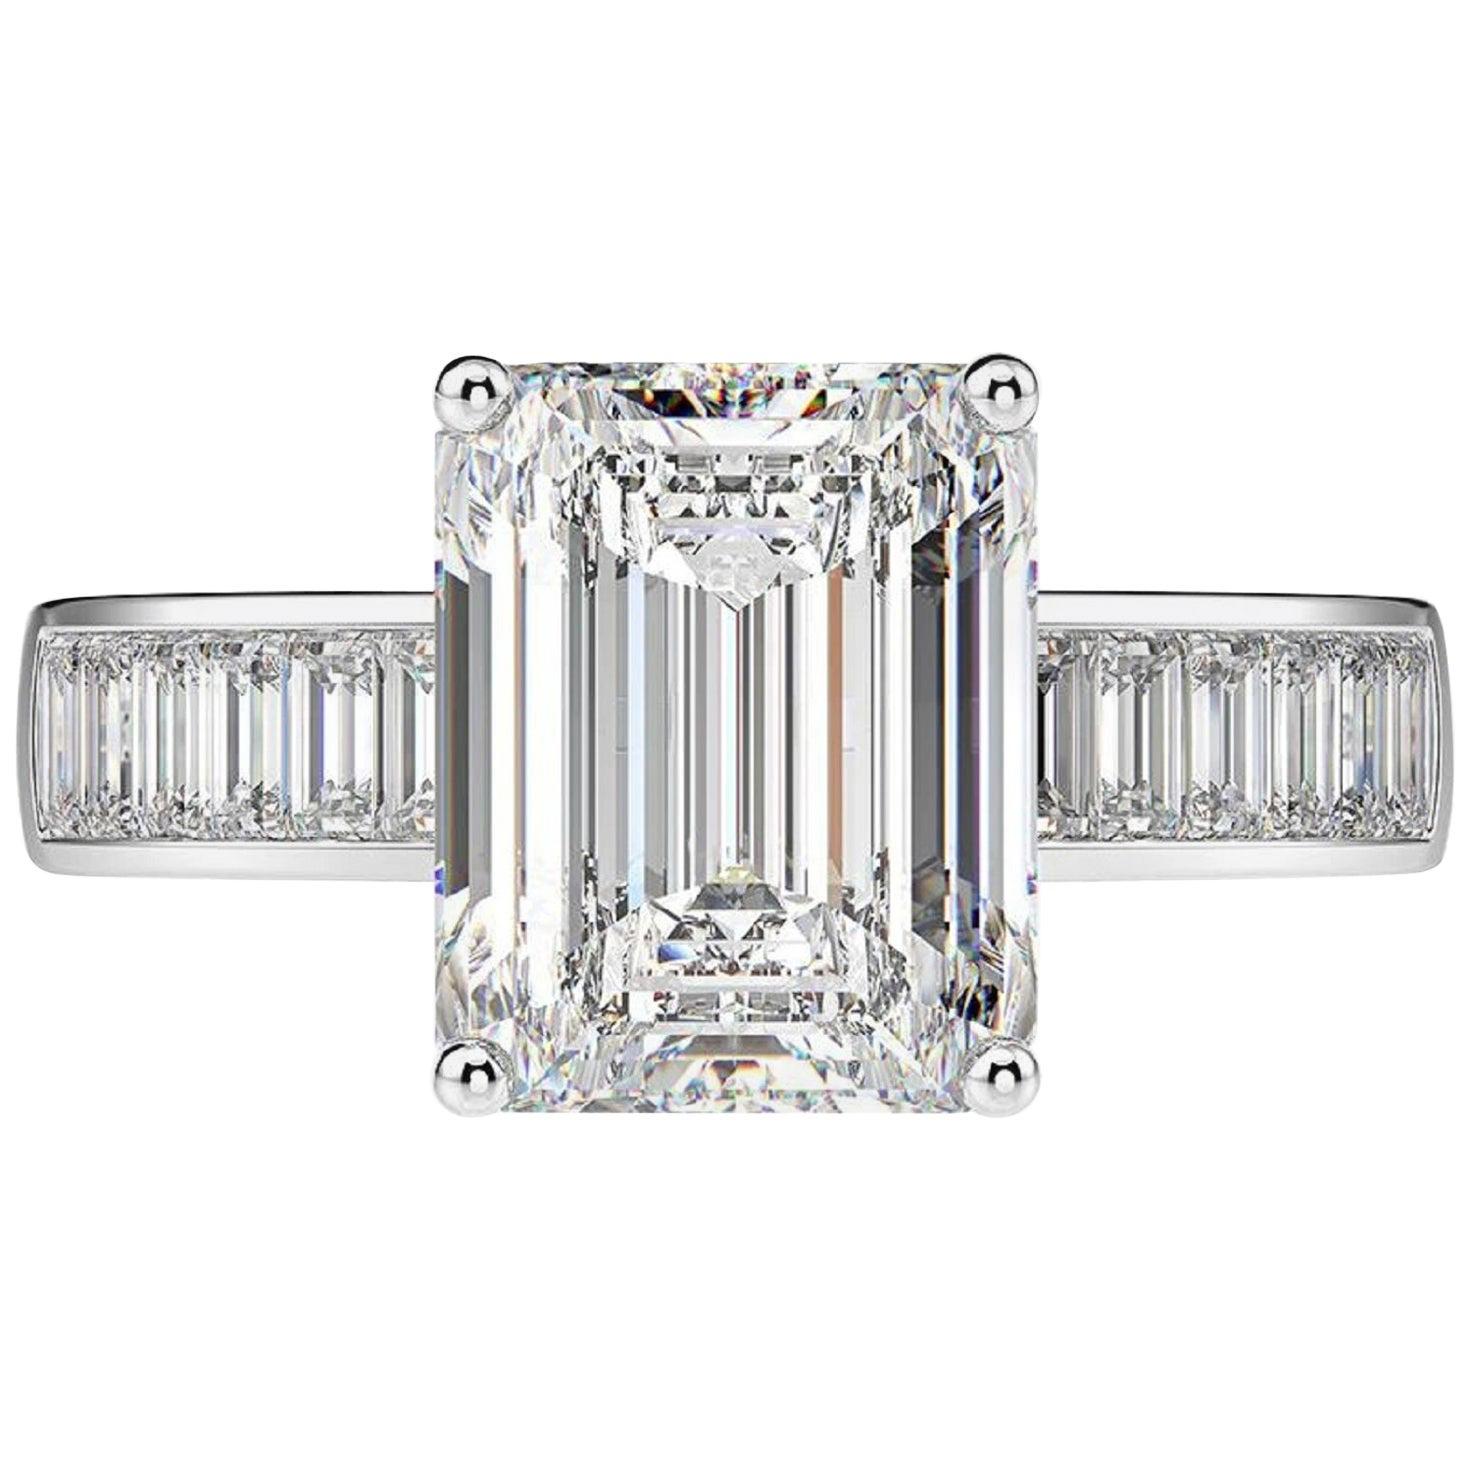 GIA Certified 2.25 Carat Diamond Engagement Ring with Side Emerald Cut Diamonds